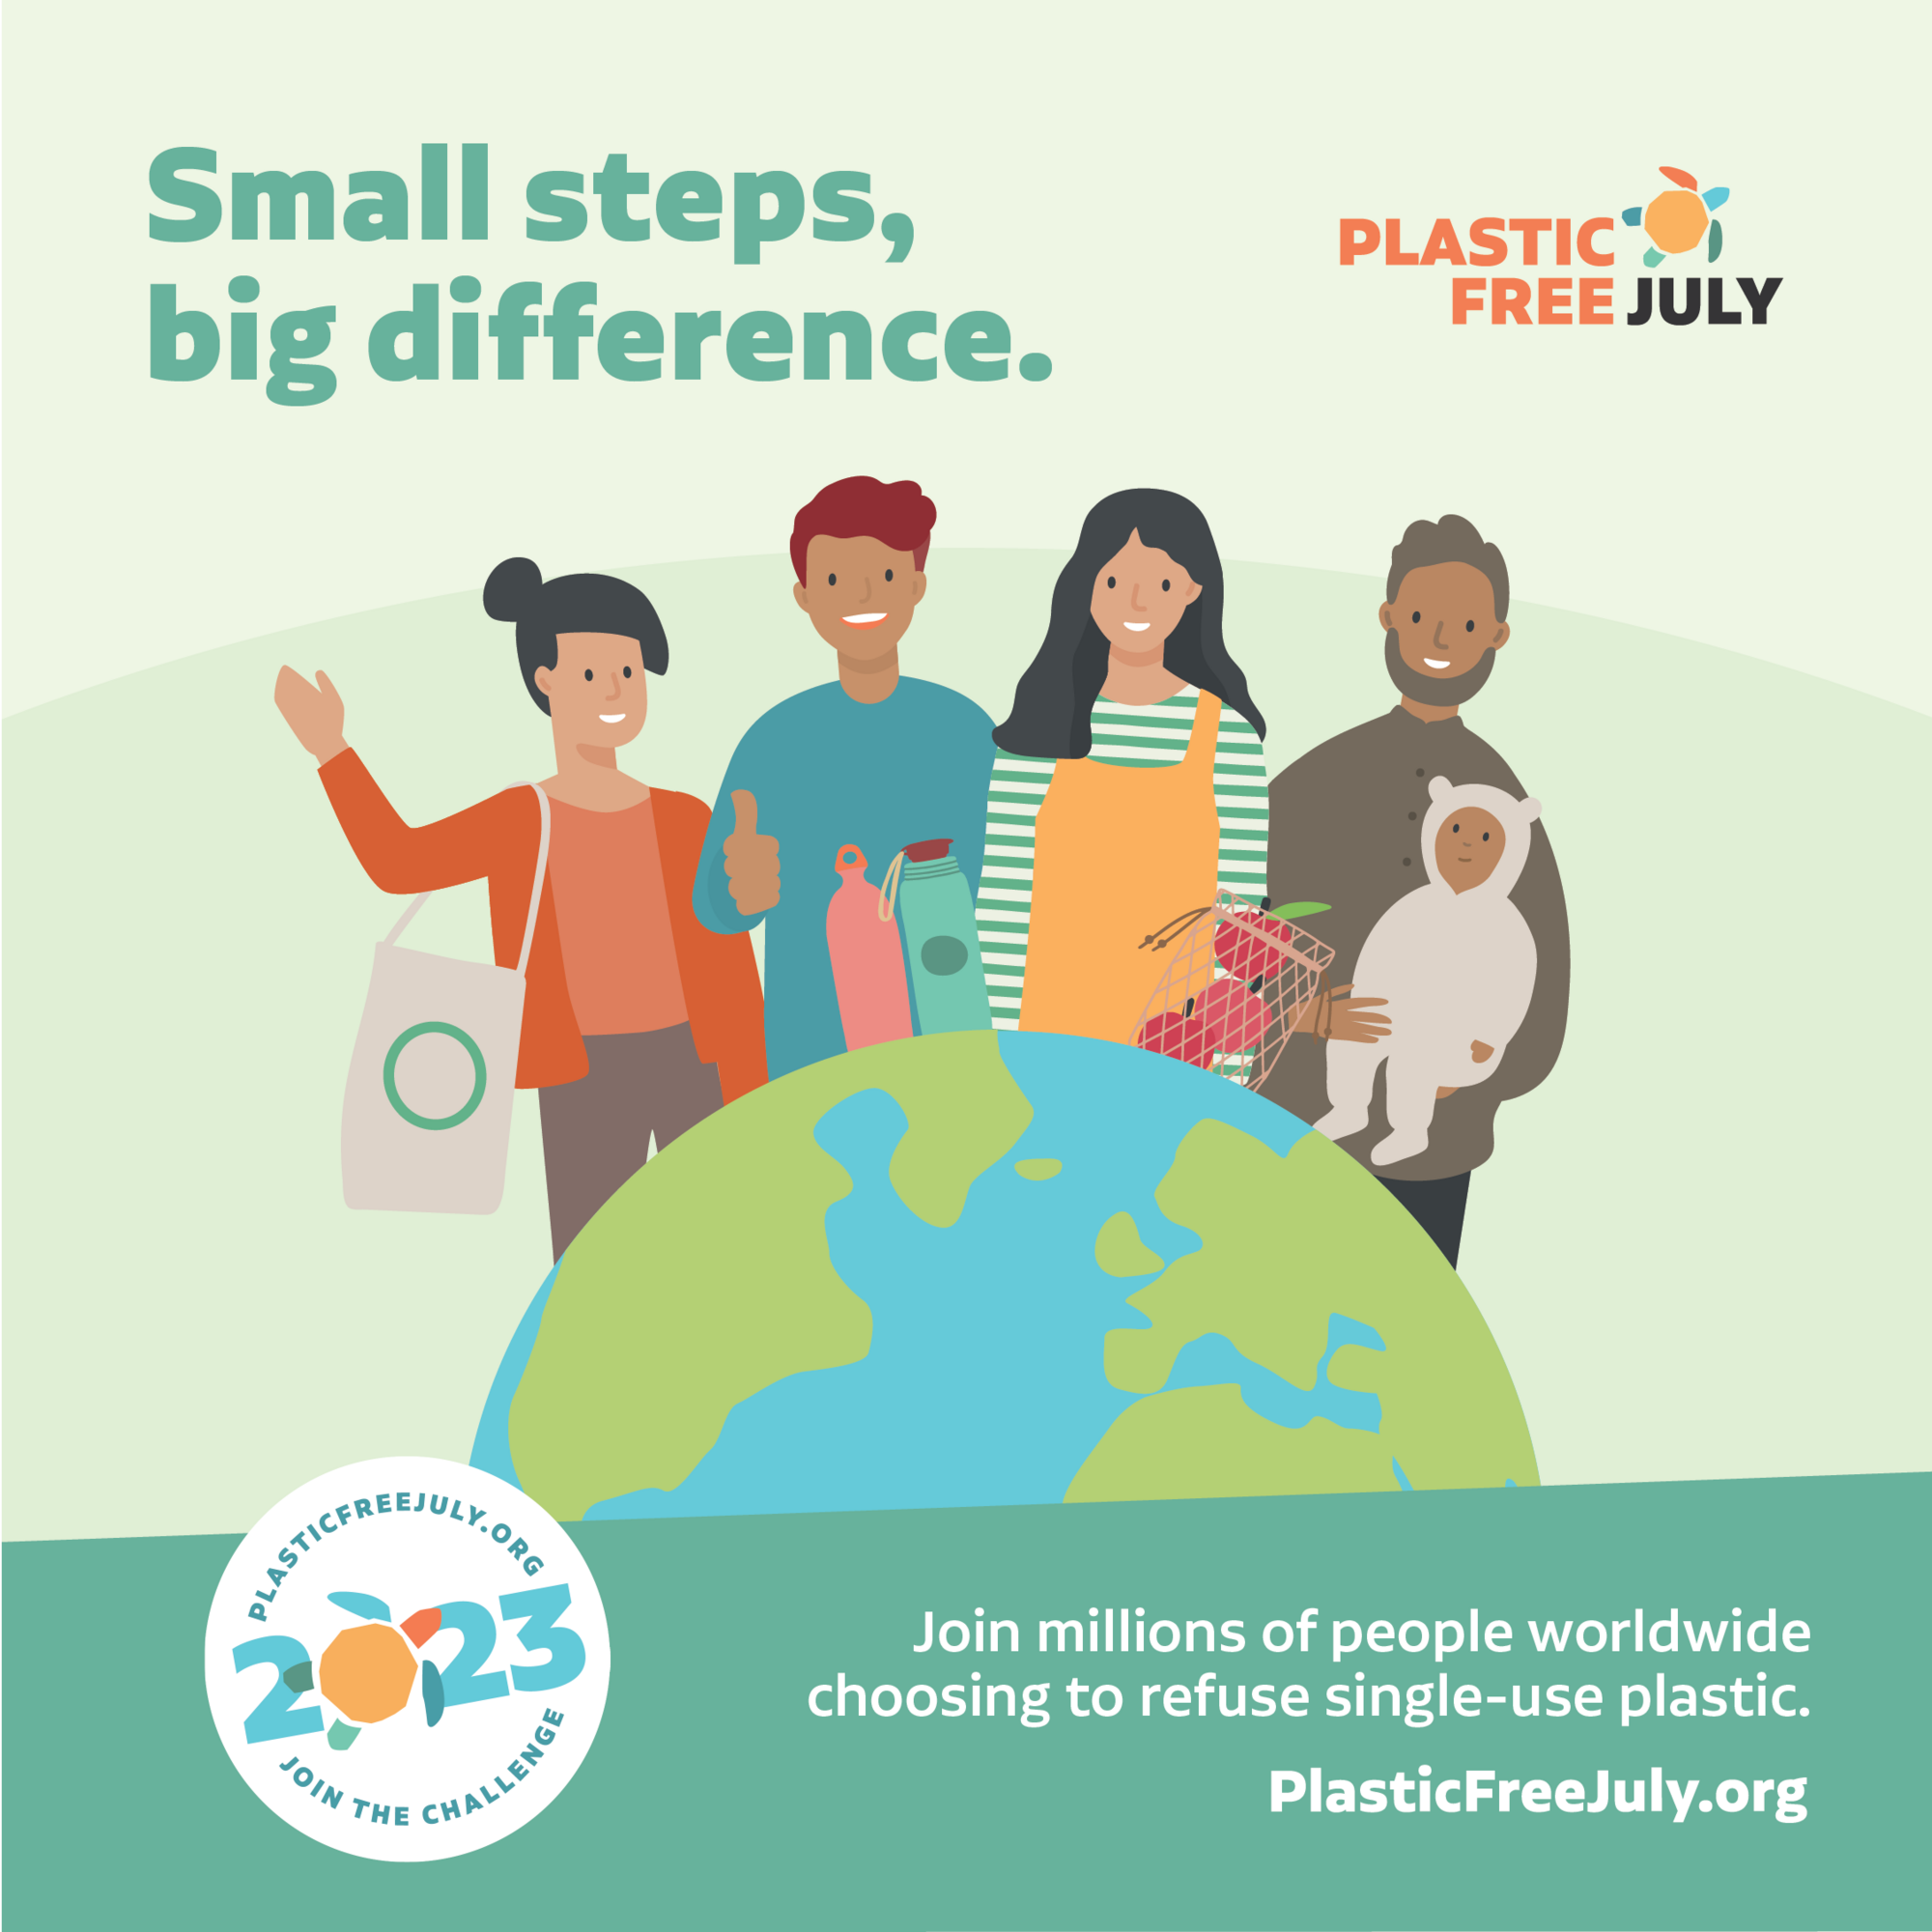 Plastic Free July Infographic to help encourage small actions to make a big difference